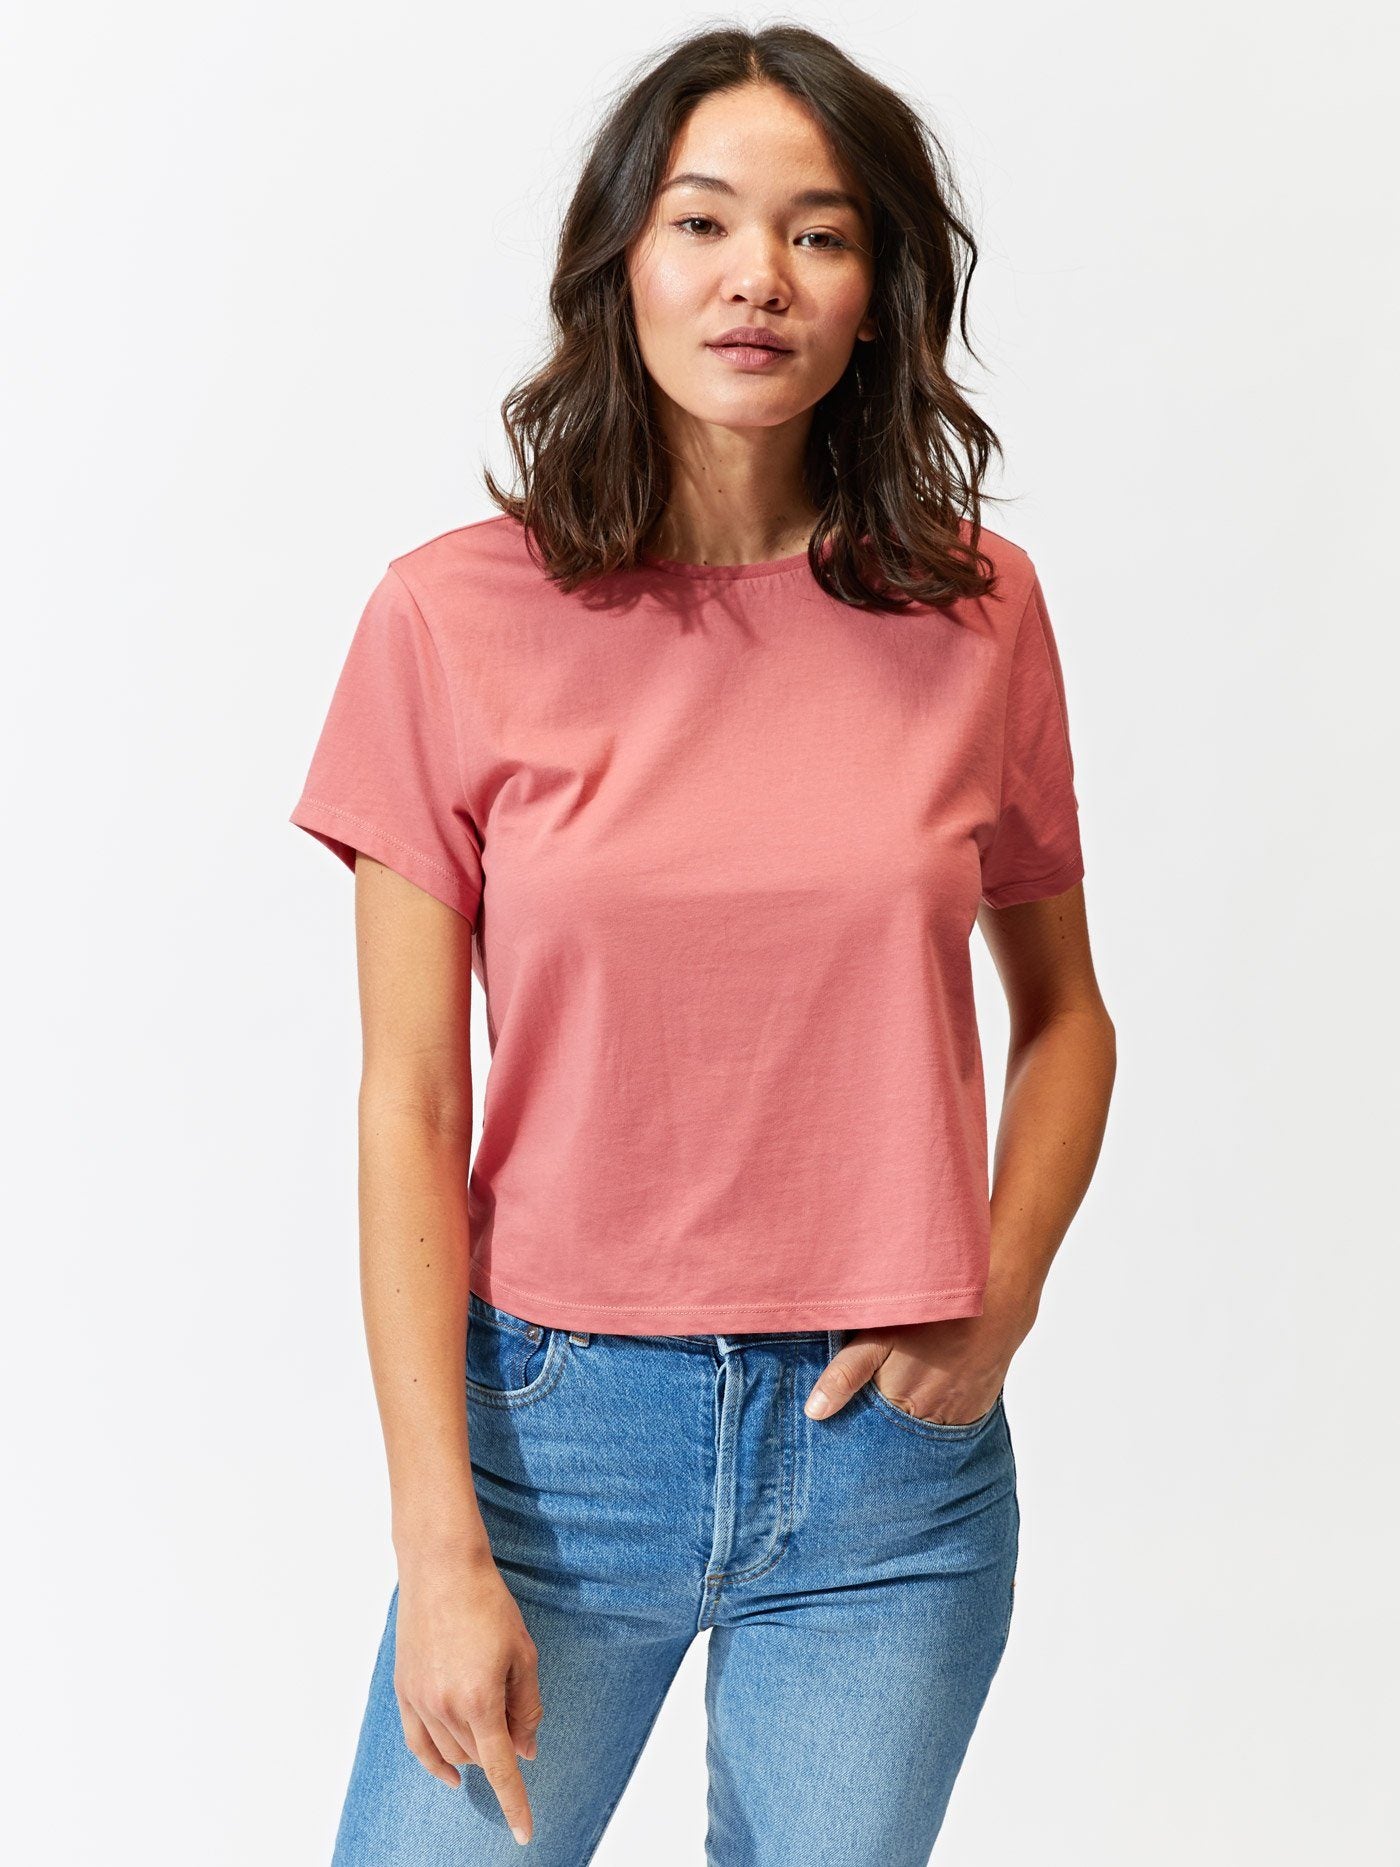 Invincible Cropped Crew Tee Womens Tops Tee Threads 4 Thought